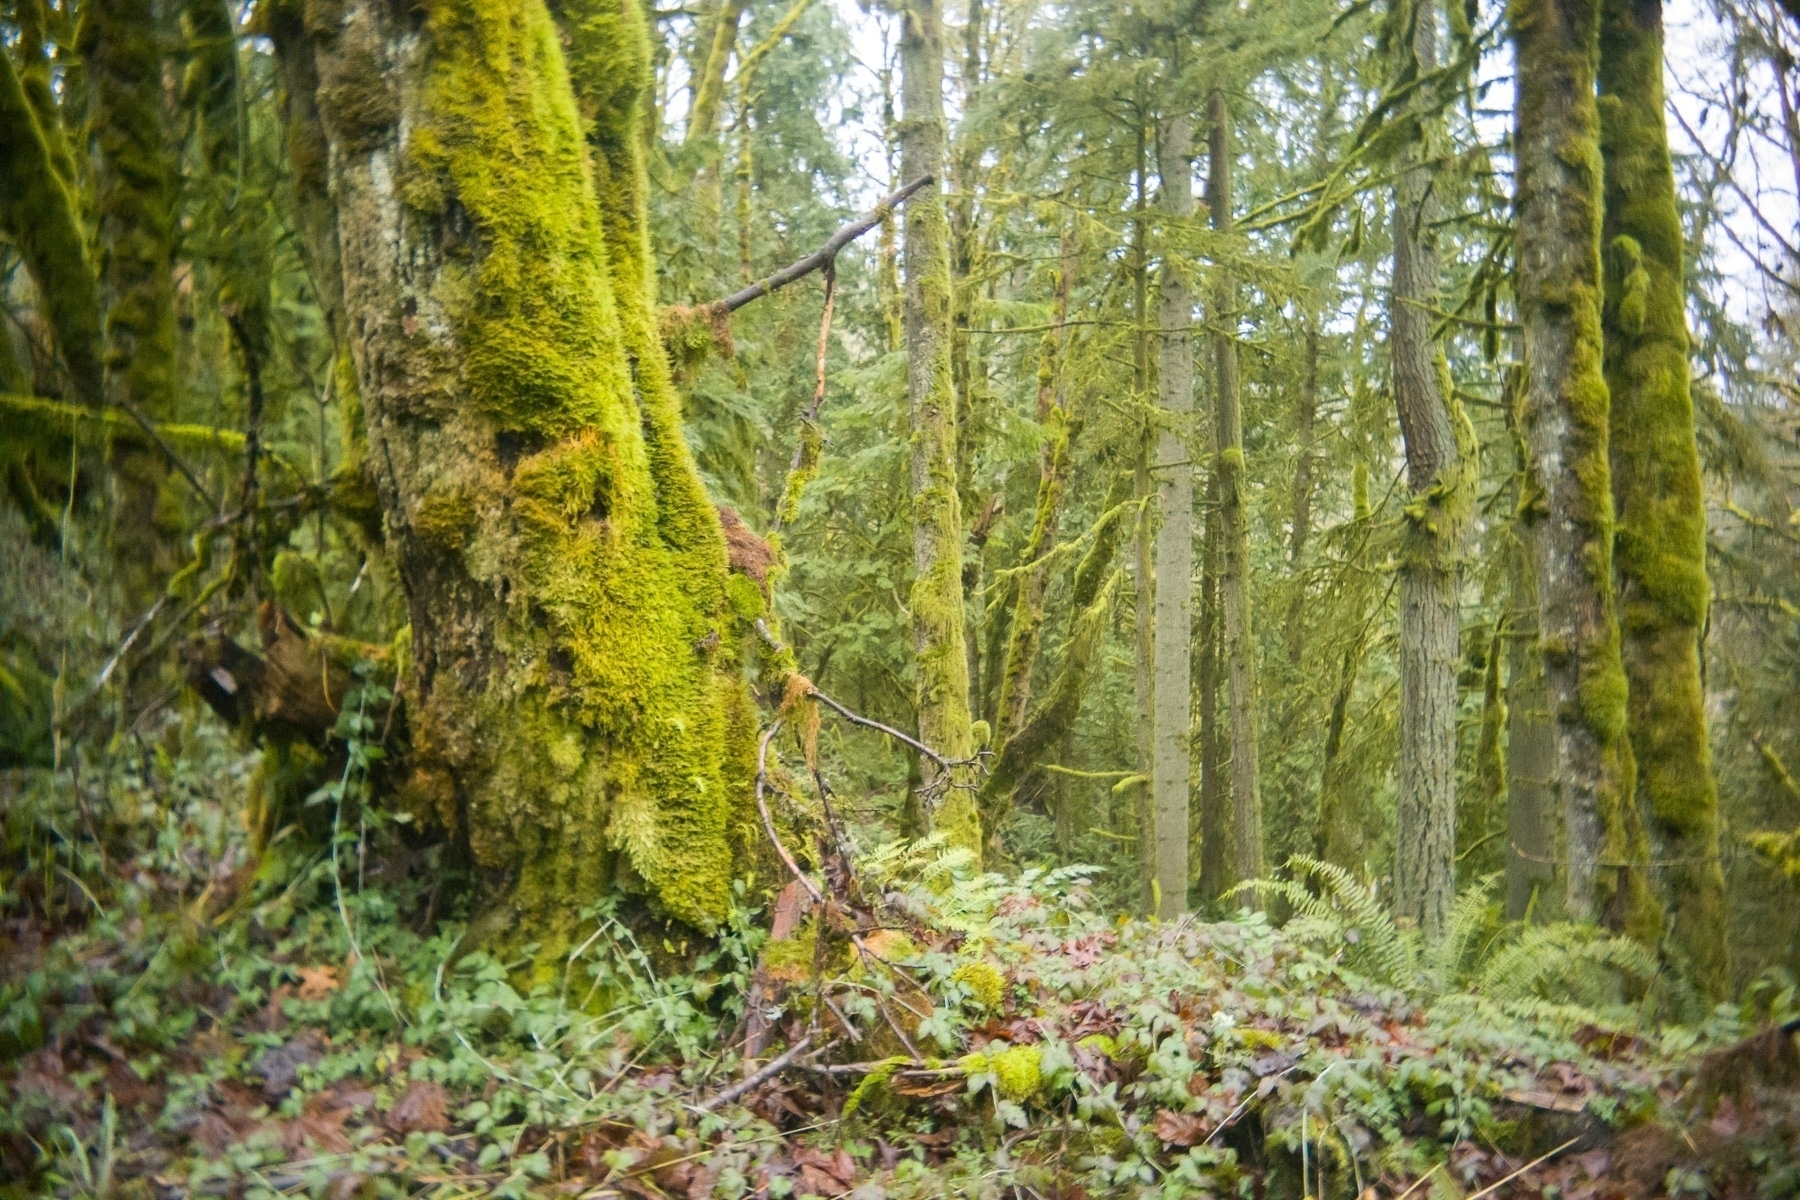 A moss covered tree trunk in the foreground and many other mossy trees behind in damp woods.